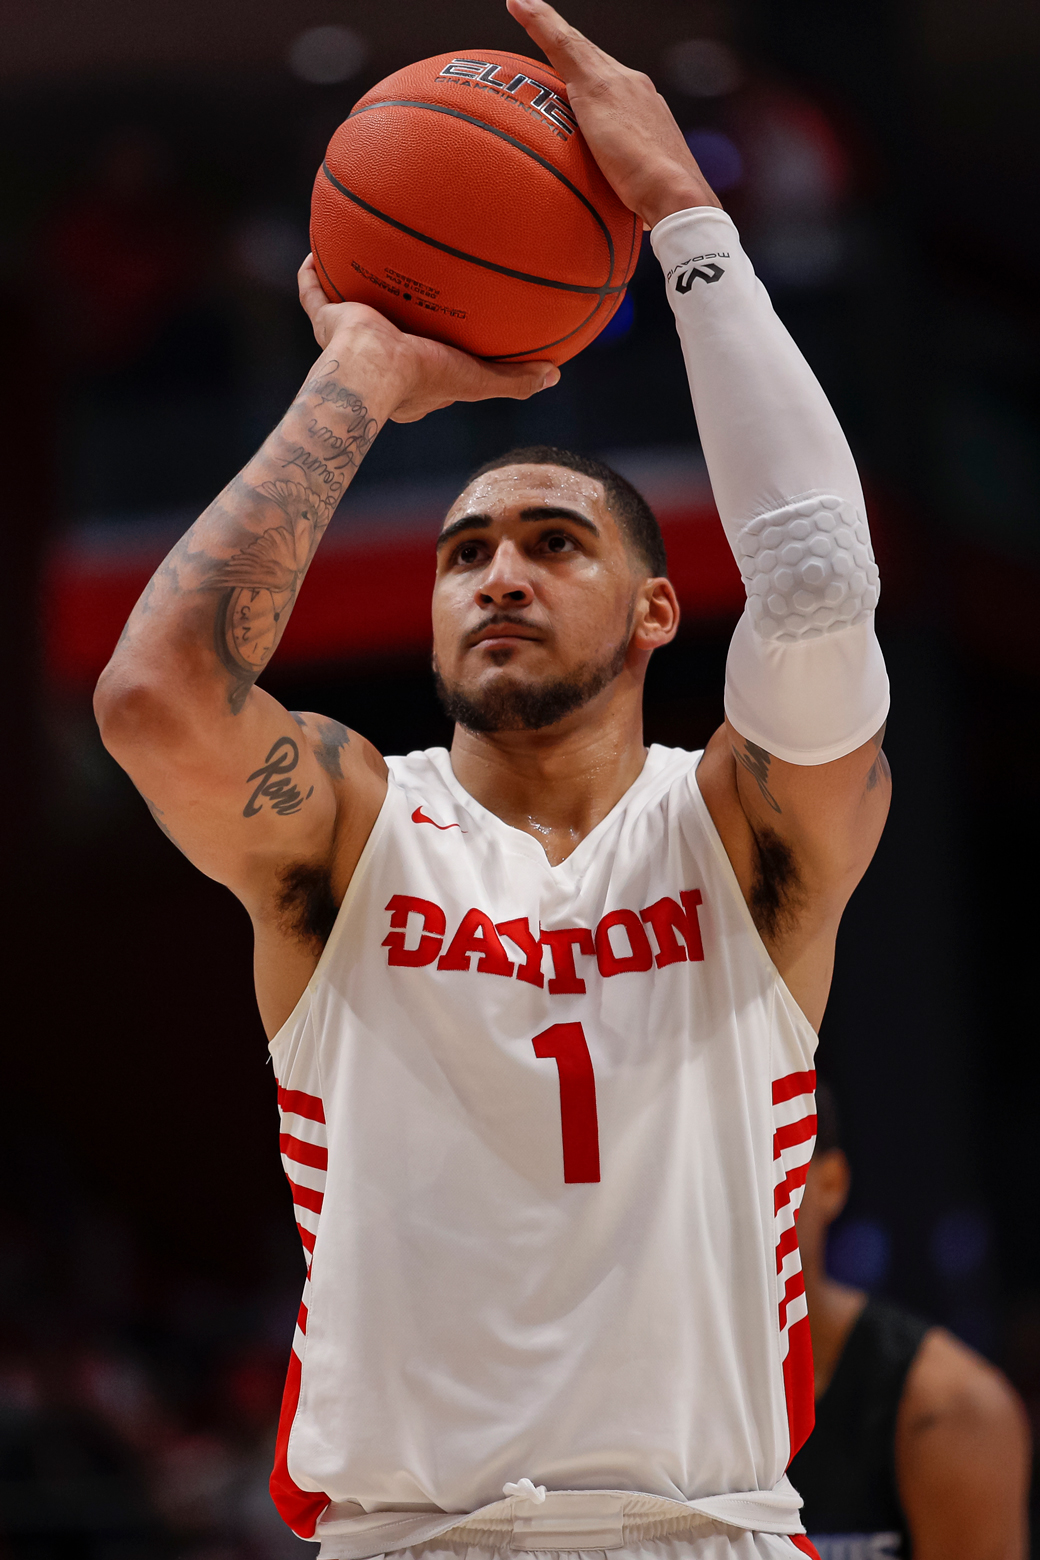 Thomson: Obi Toppin's patience leads him to Dayton